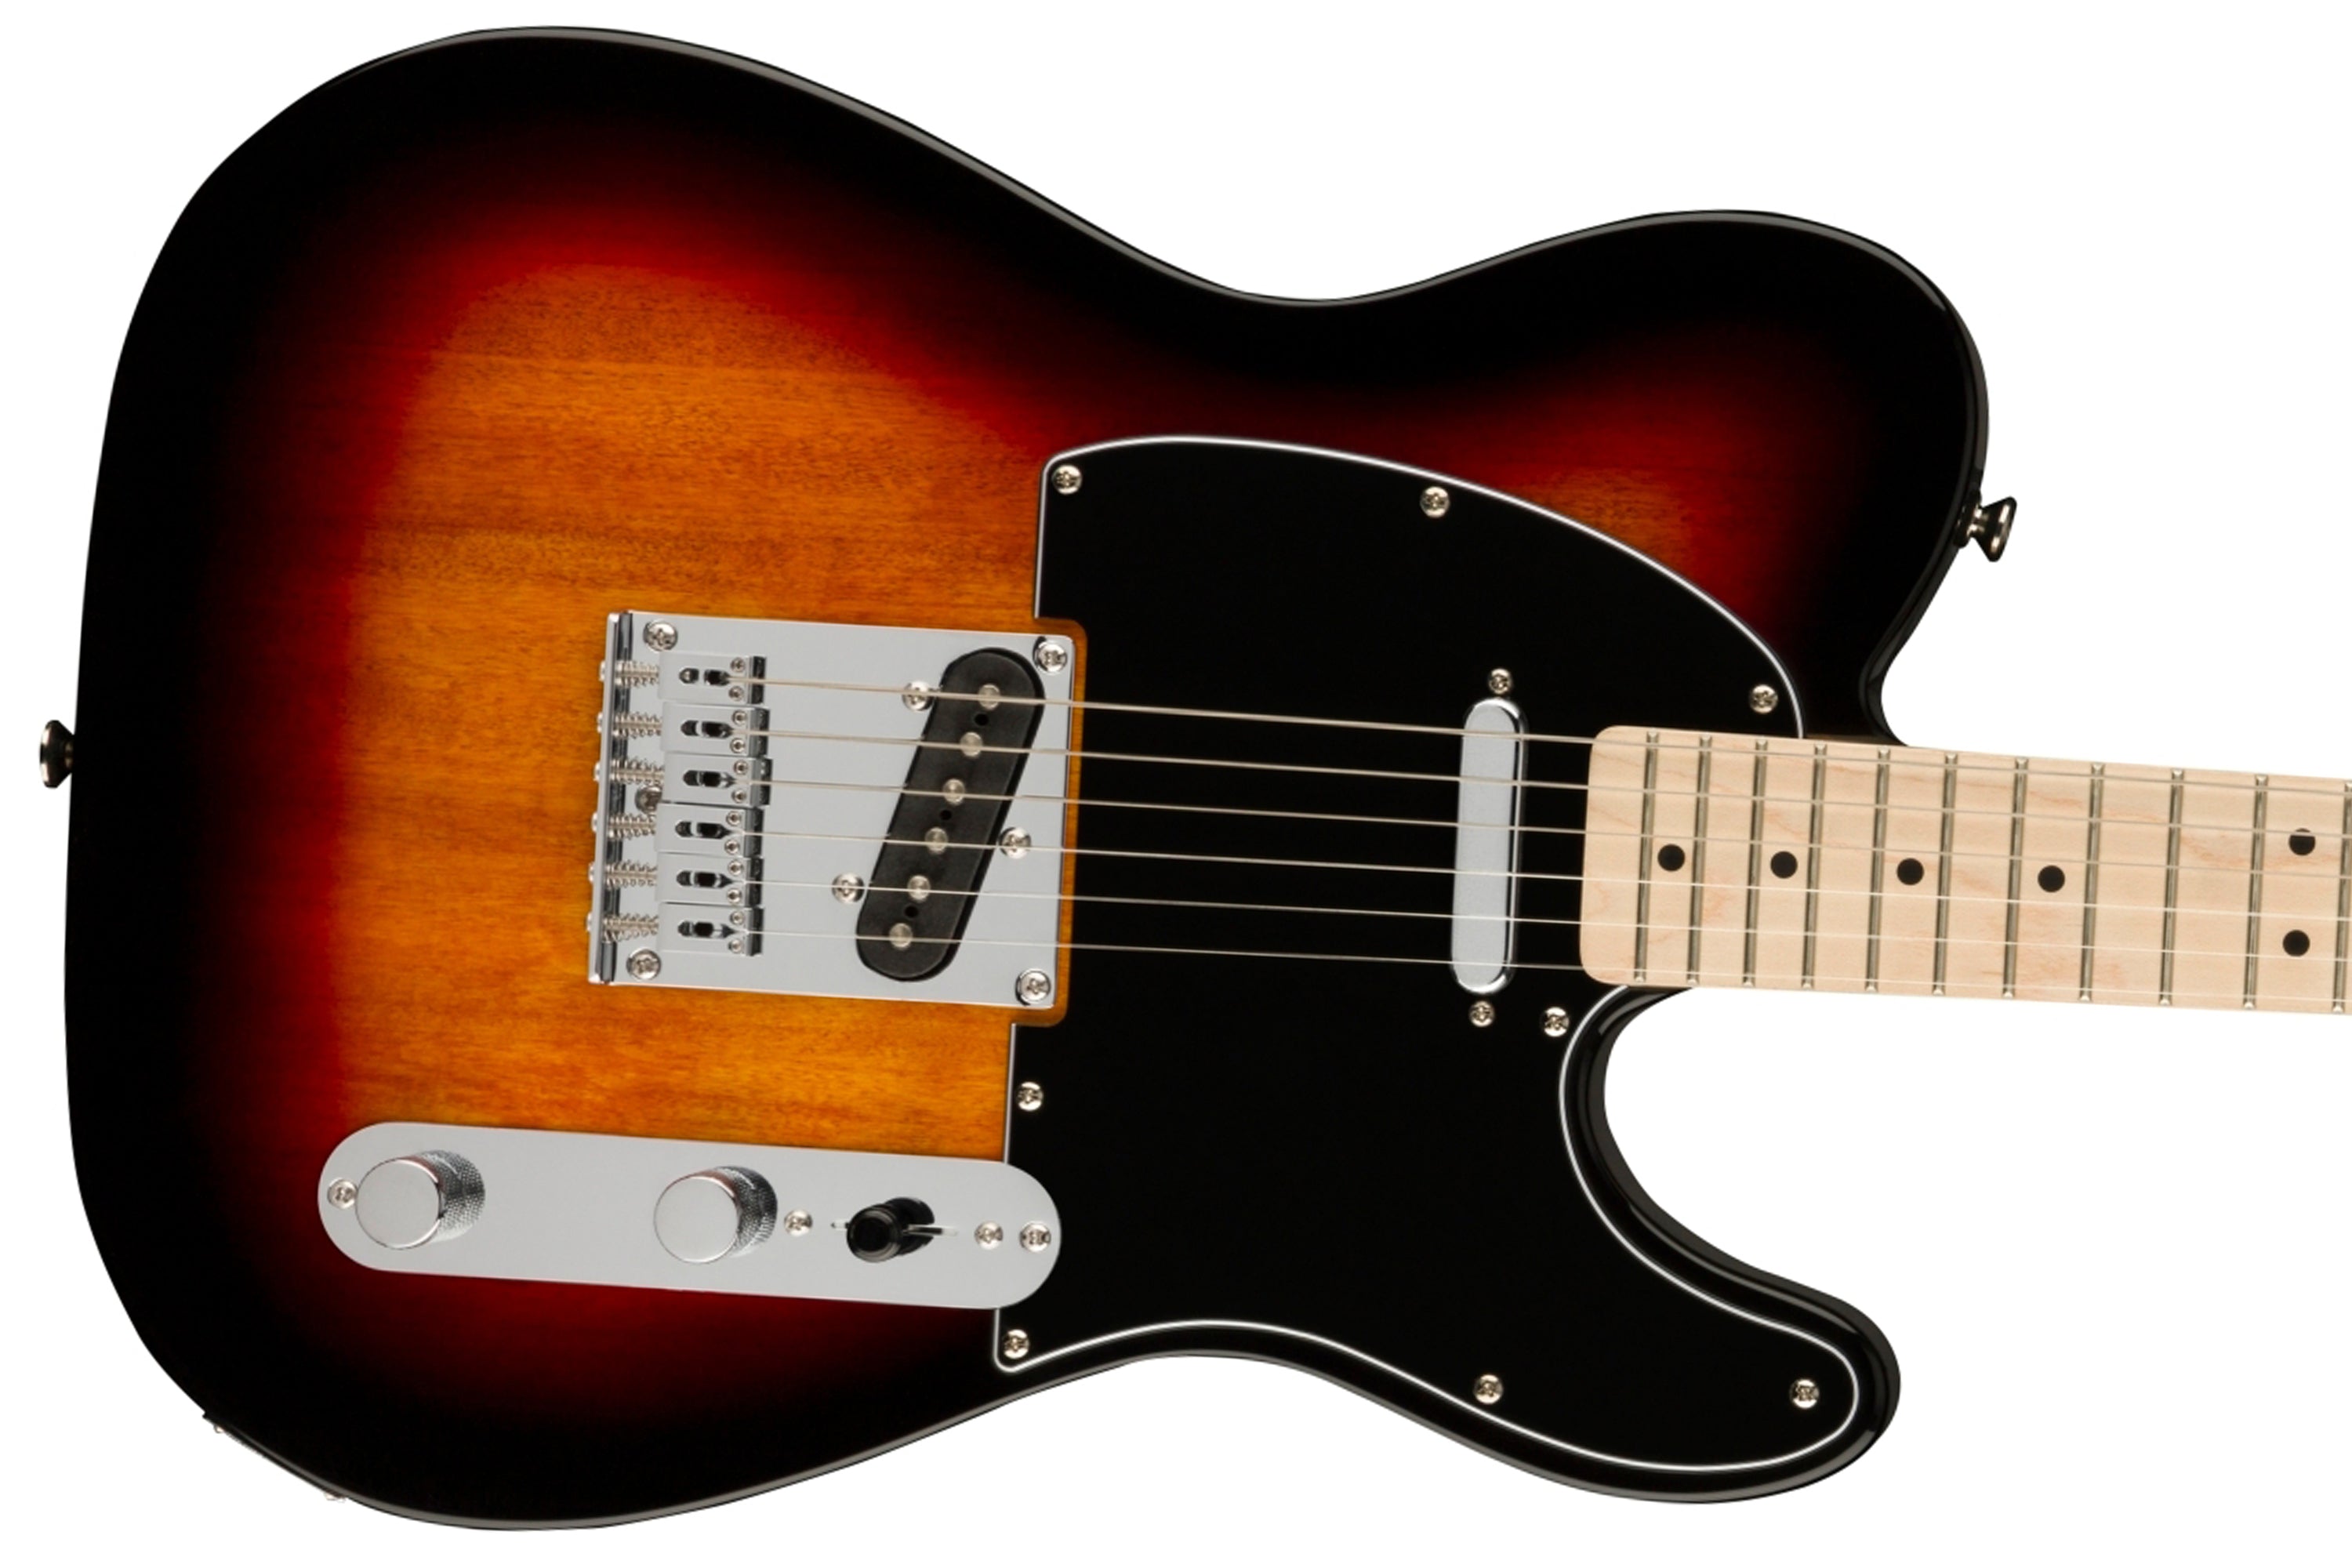 Squire By Fender Affinity Series Telecaster Guitar - 3-Color